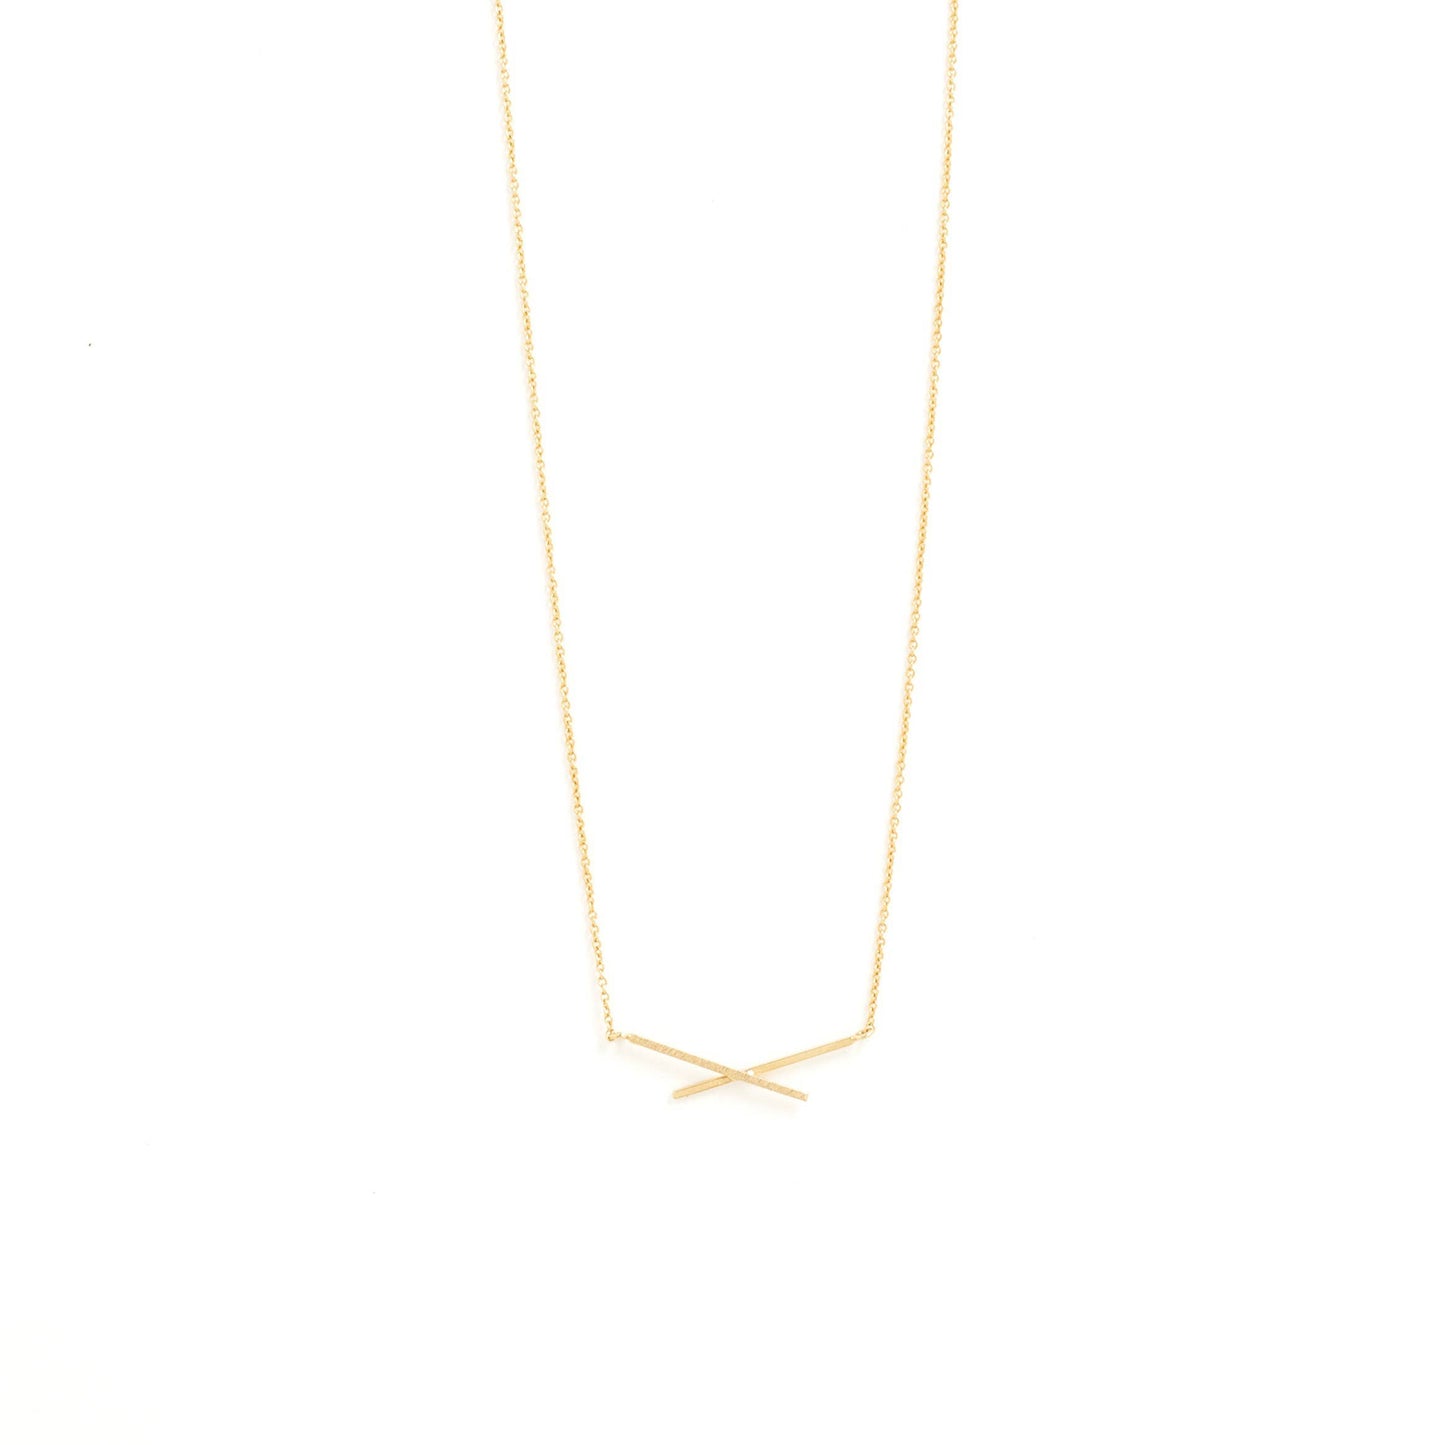 Etched Criss Cross Delicate Necklace Gold